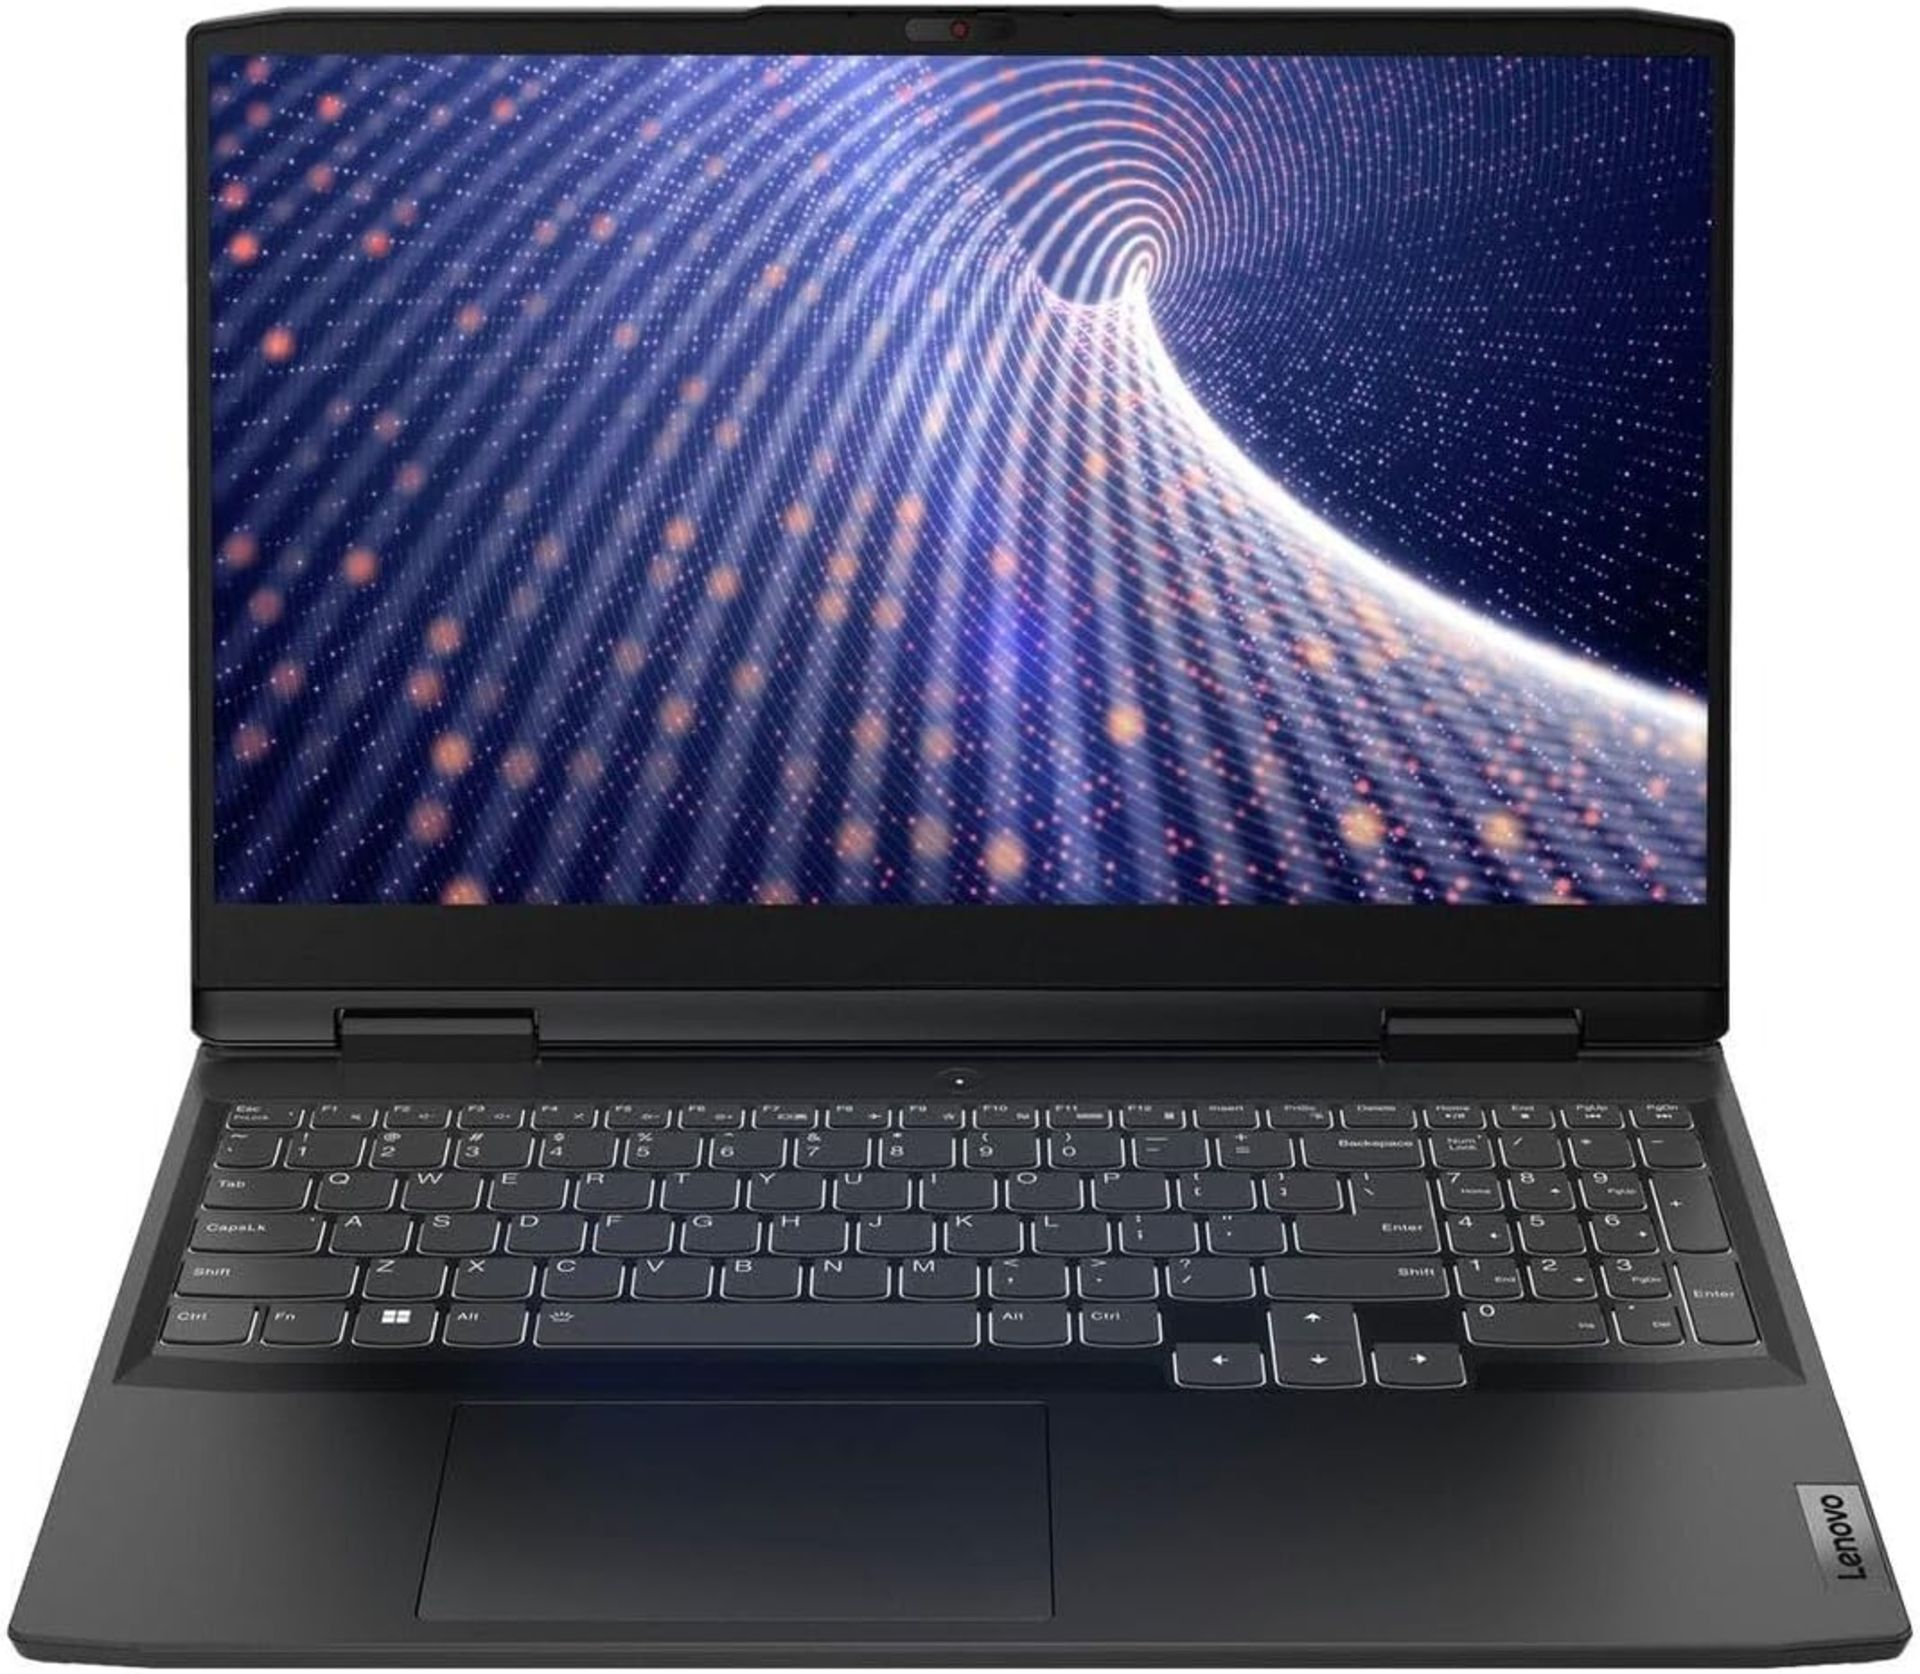 BRAND NEW FACTORY SEALED LENOVO IdeaPad Gaming 3 15ARH7 Laptop. RRP £997.88. Screen: 15.6 Inch